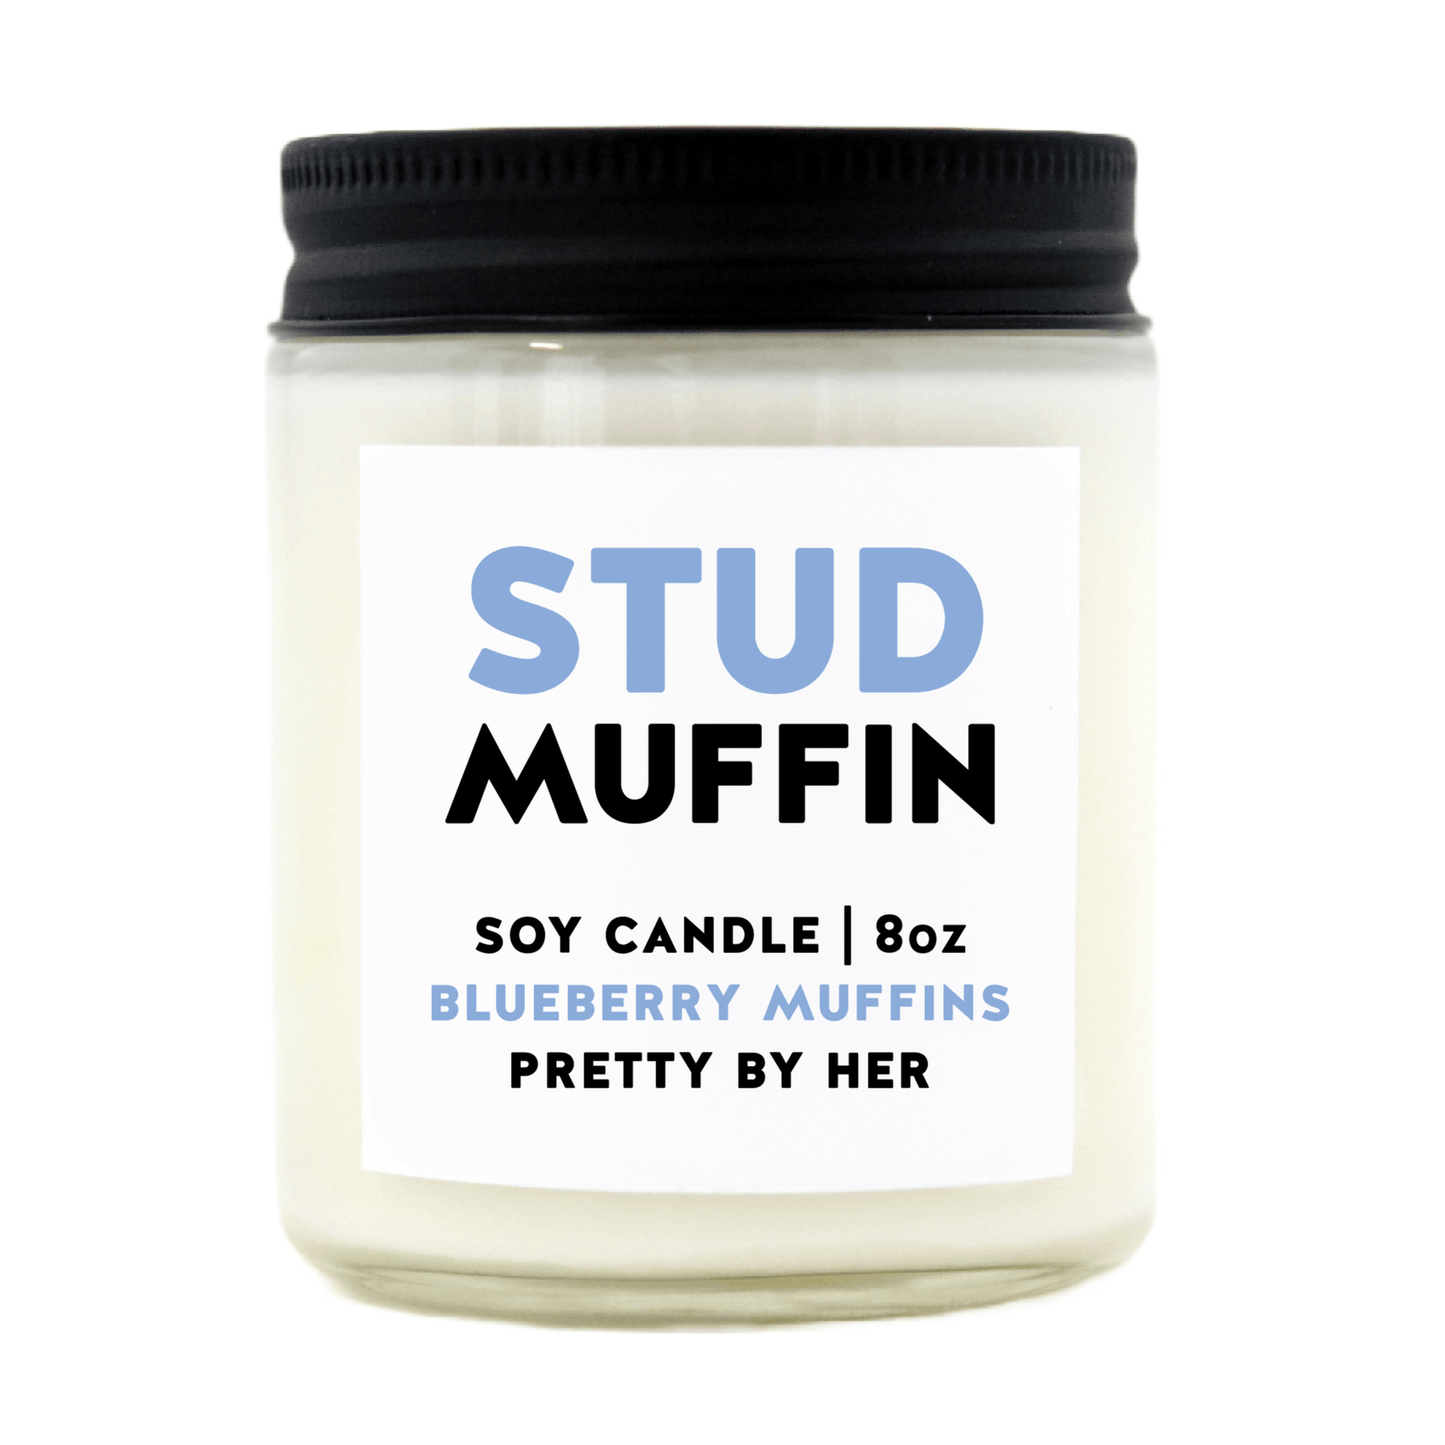 STUD MUFFIN CANDLE